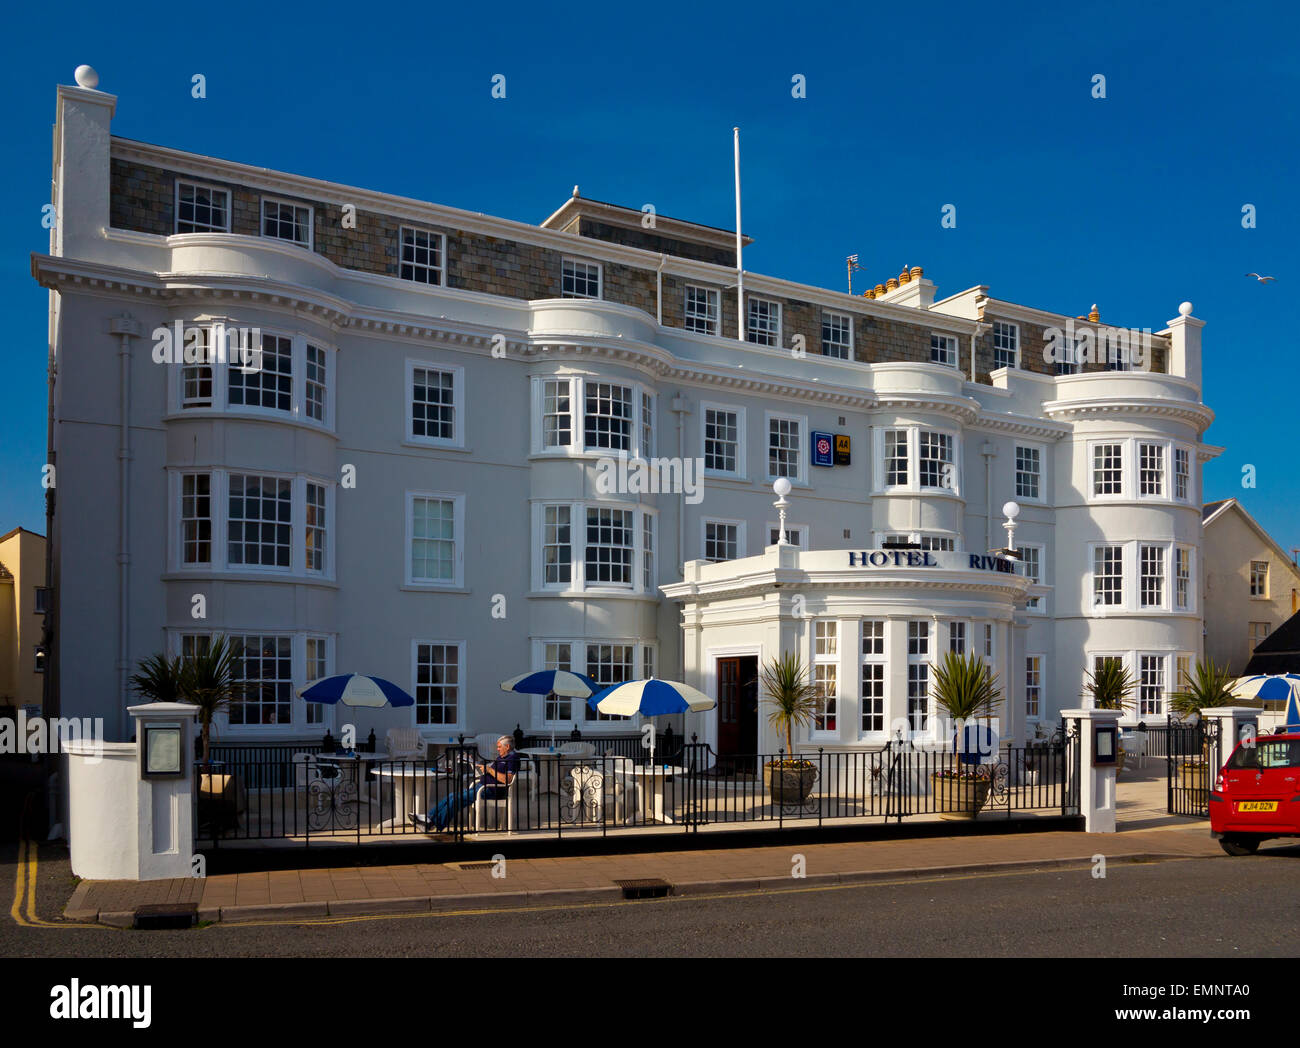 Regency facade of The Hotel Riviera on the Esplanade in Sidmouth a seaside resort in South Devon England UK Stock Photo